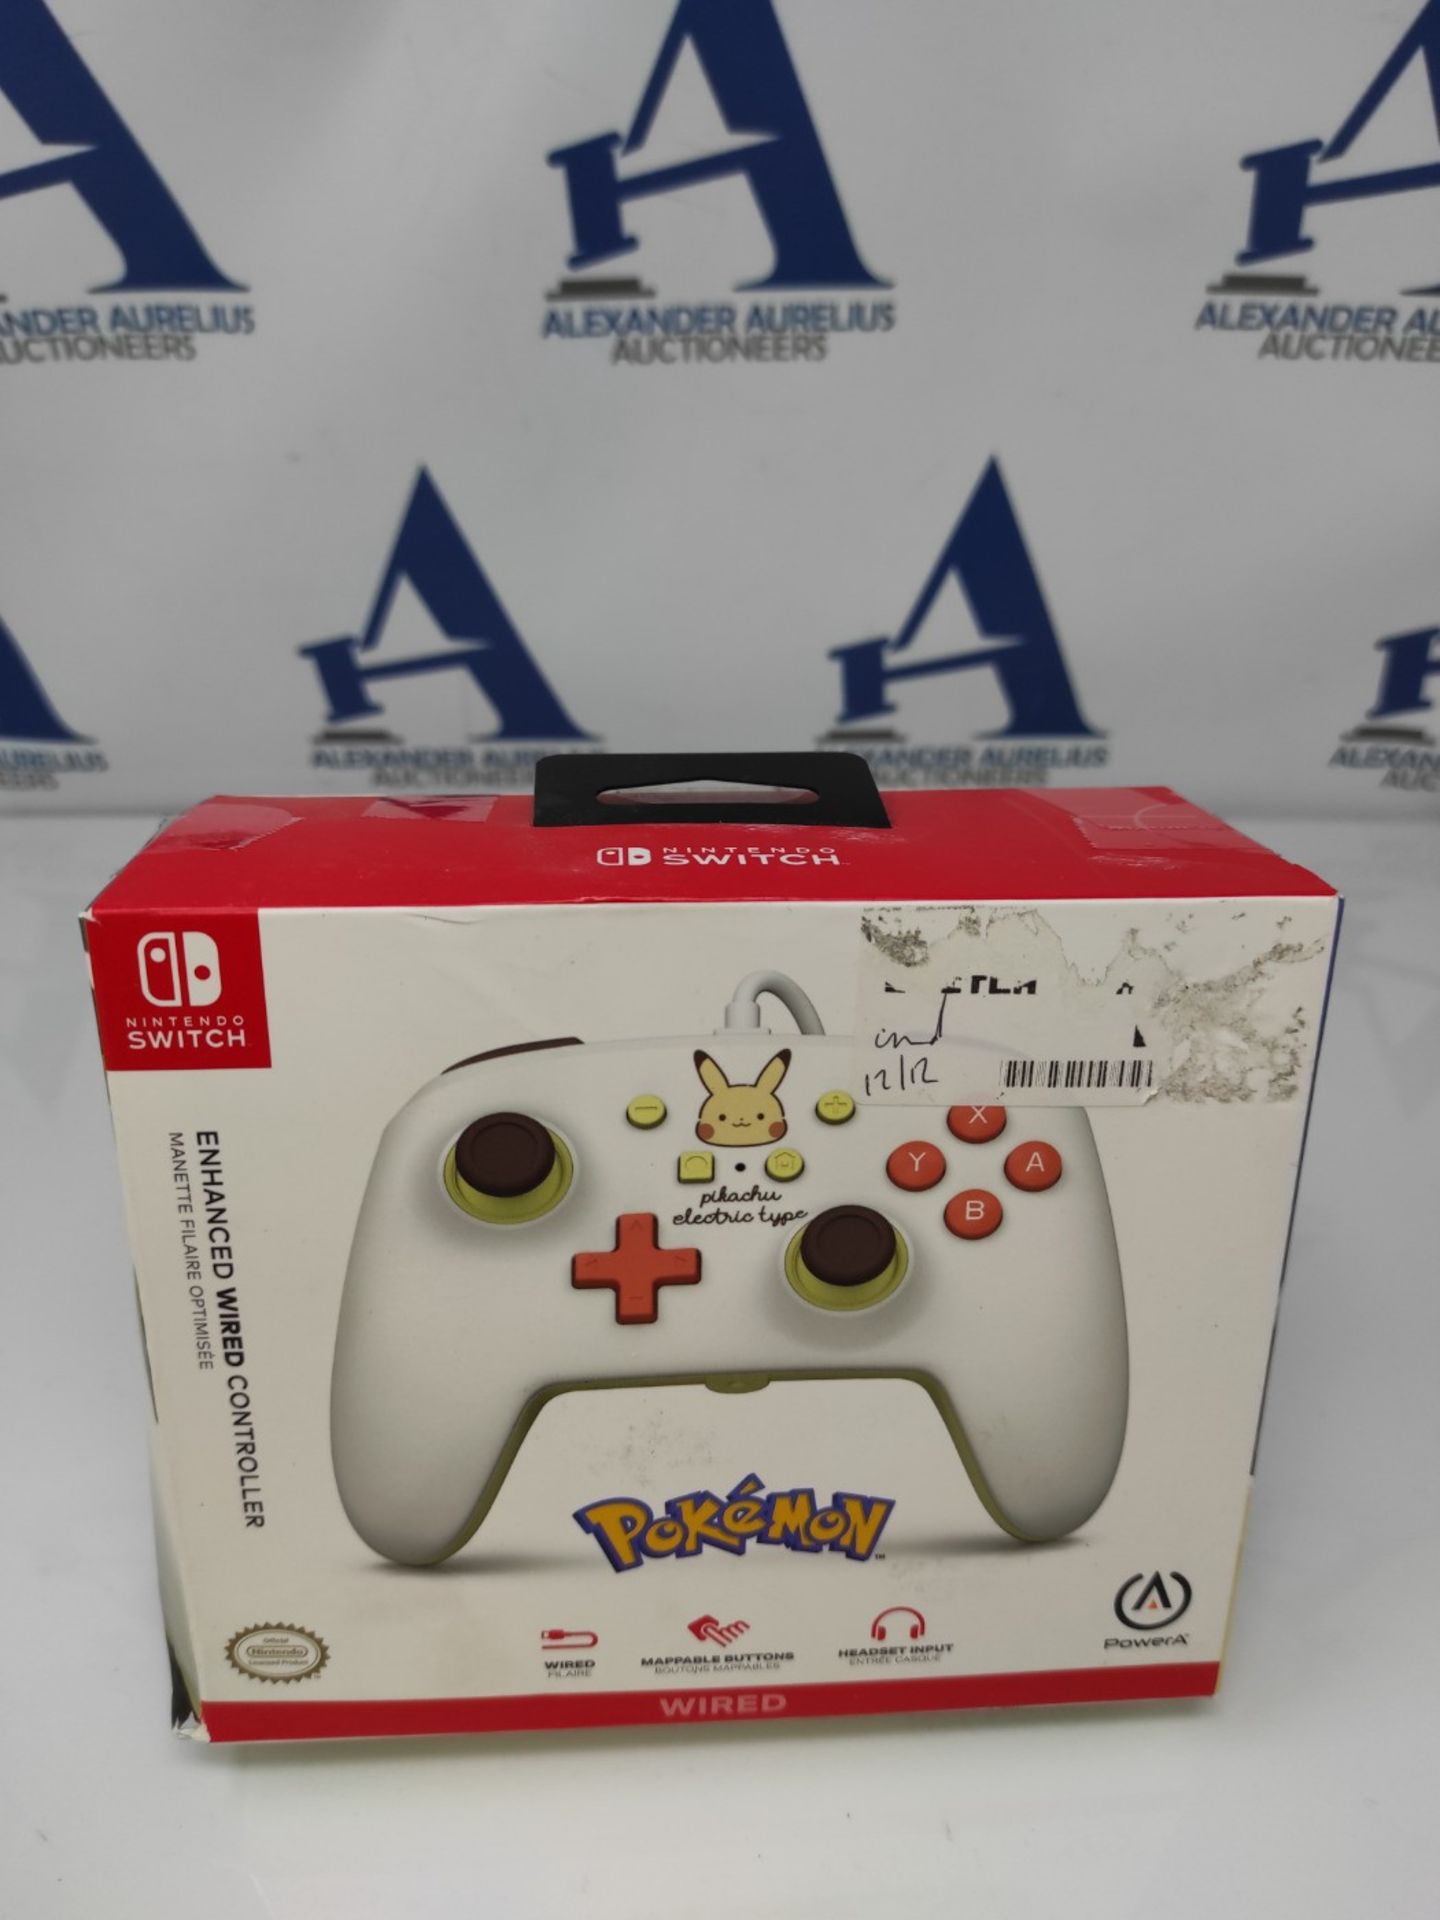 PowerA Improved wired controller for Nintendo Switch - Pikachu Electric Type - Image 2 of 3